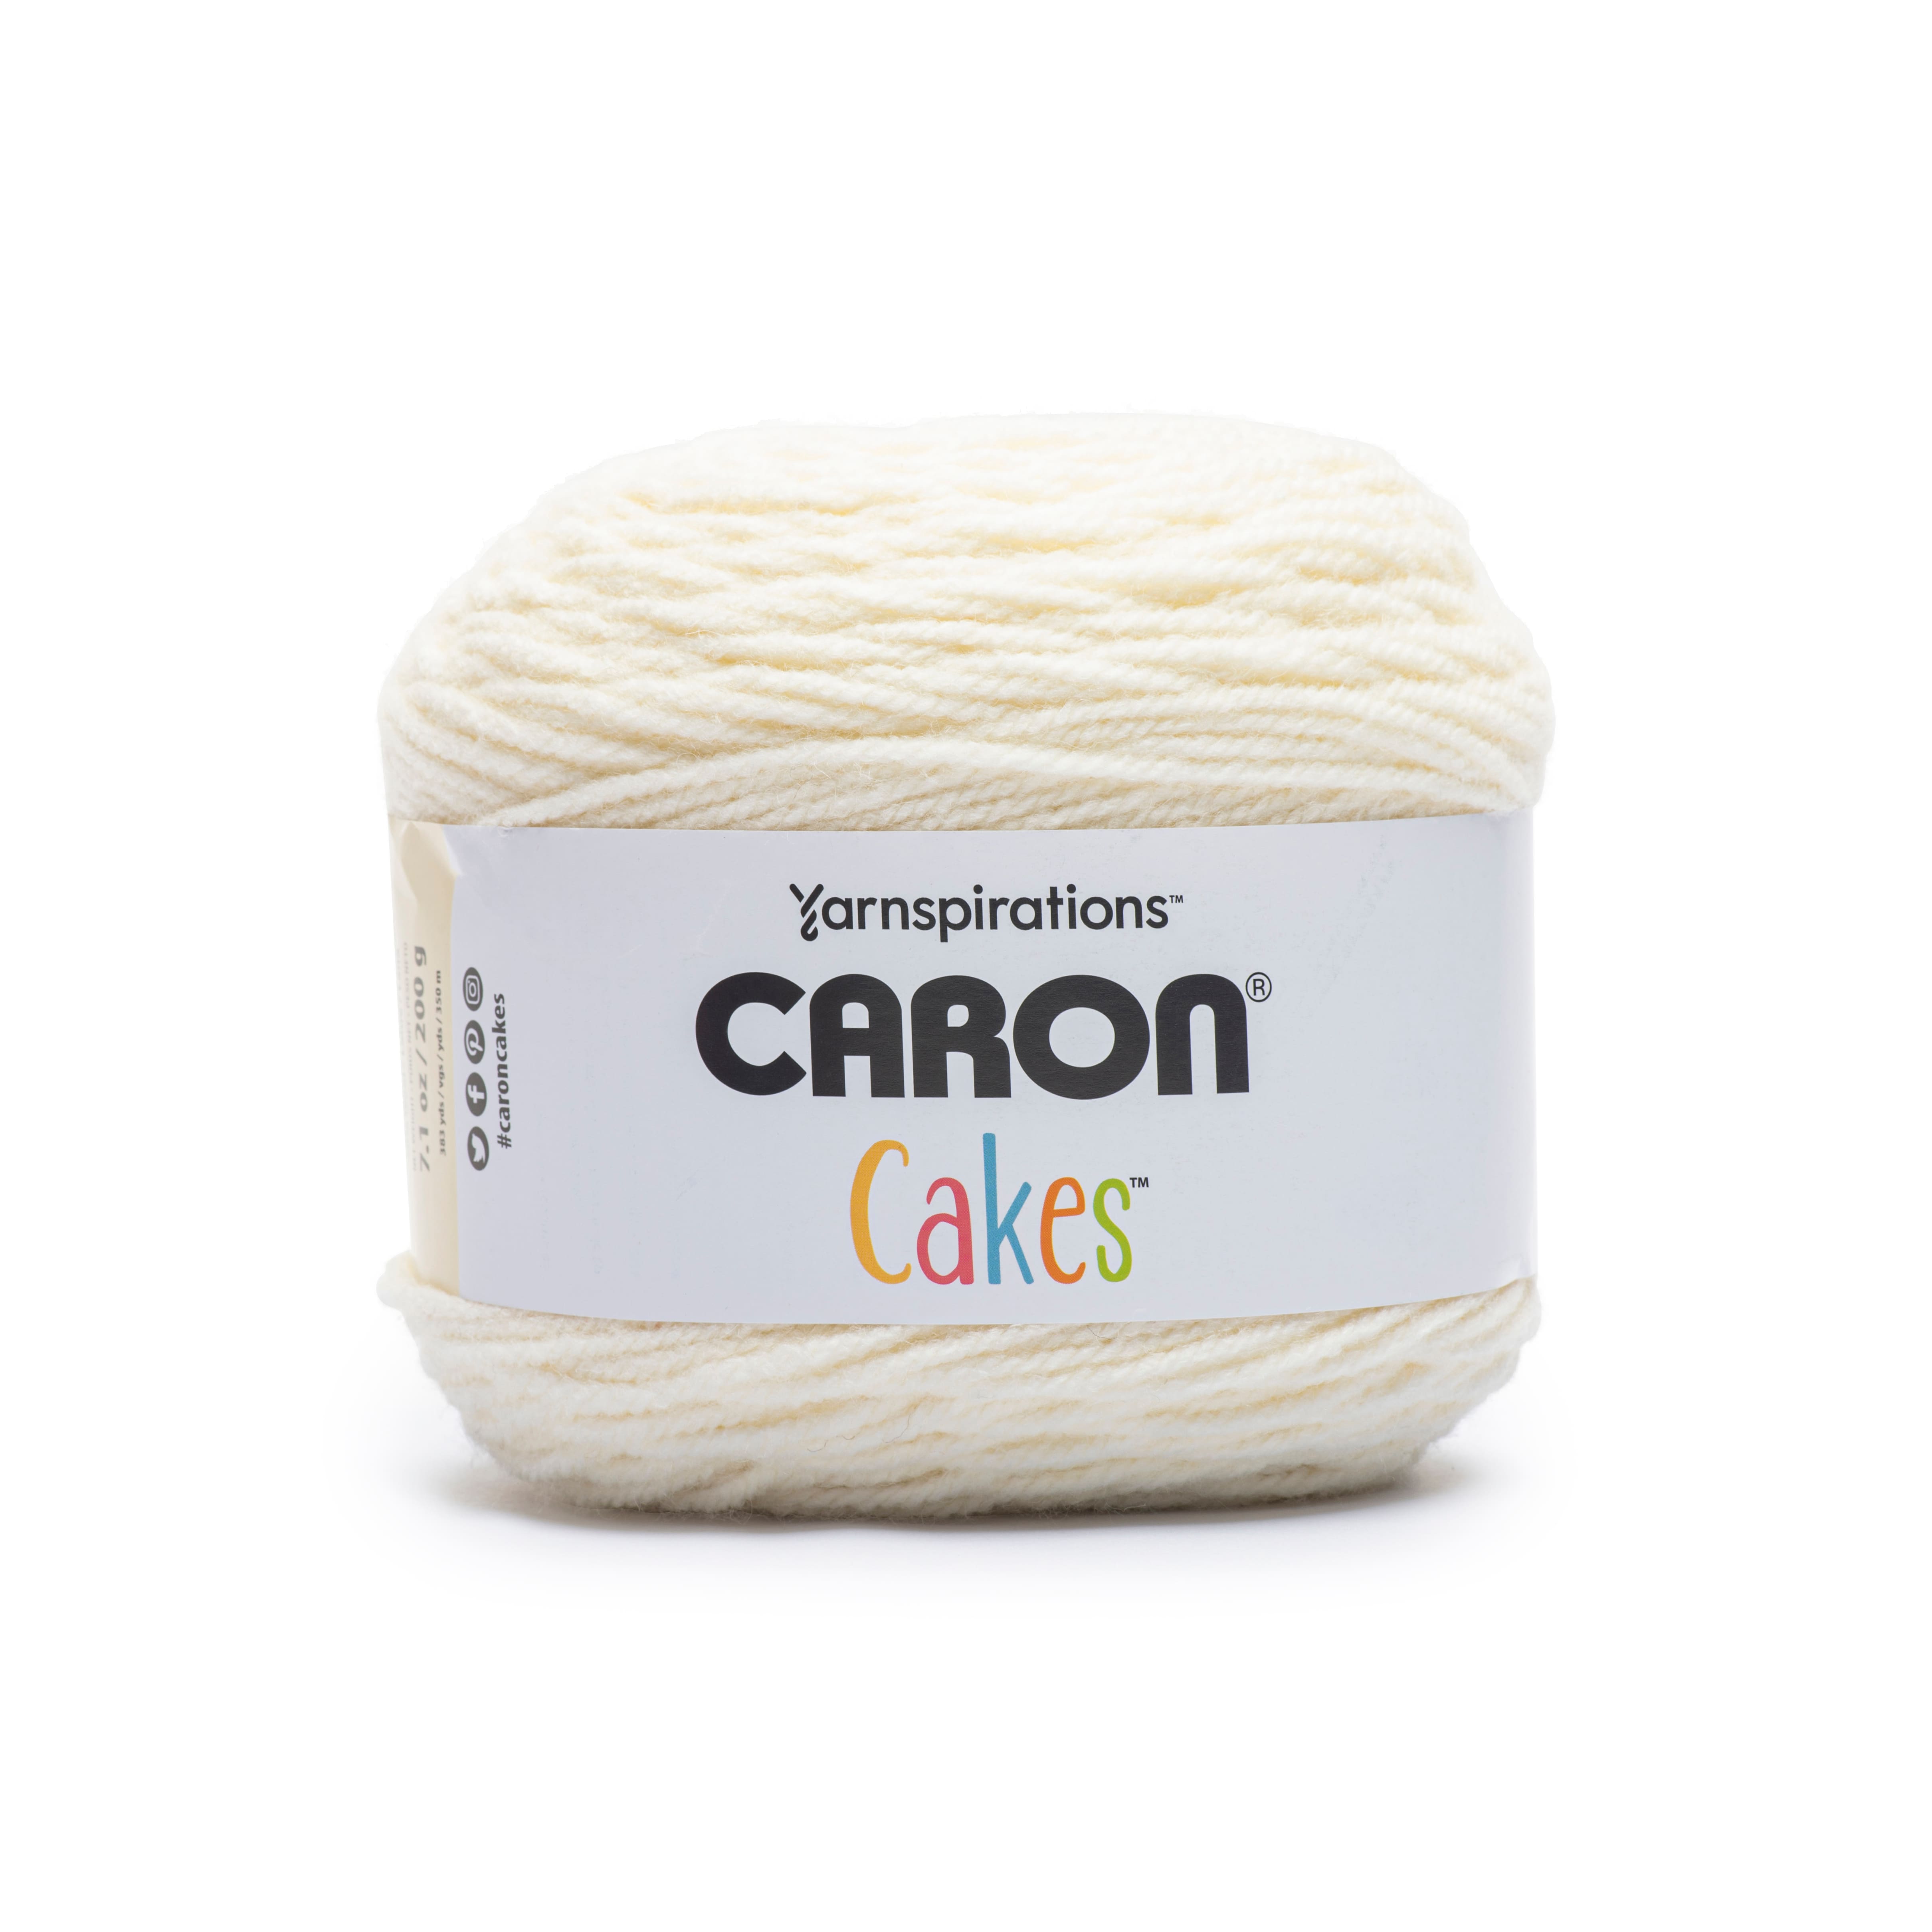 Caron Cakes Yarn in Buttercup Color, Shades of Beige and Browns. 